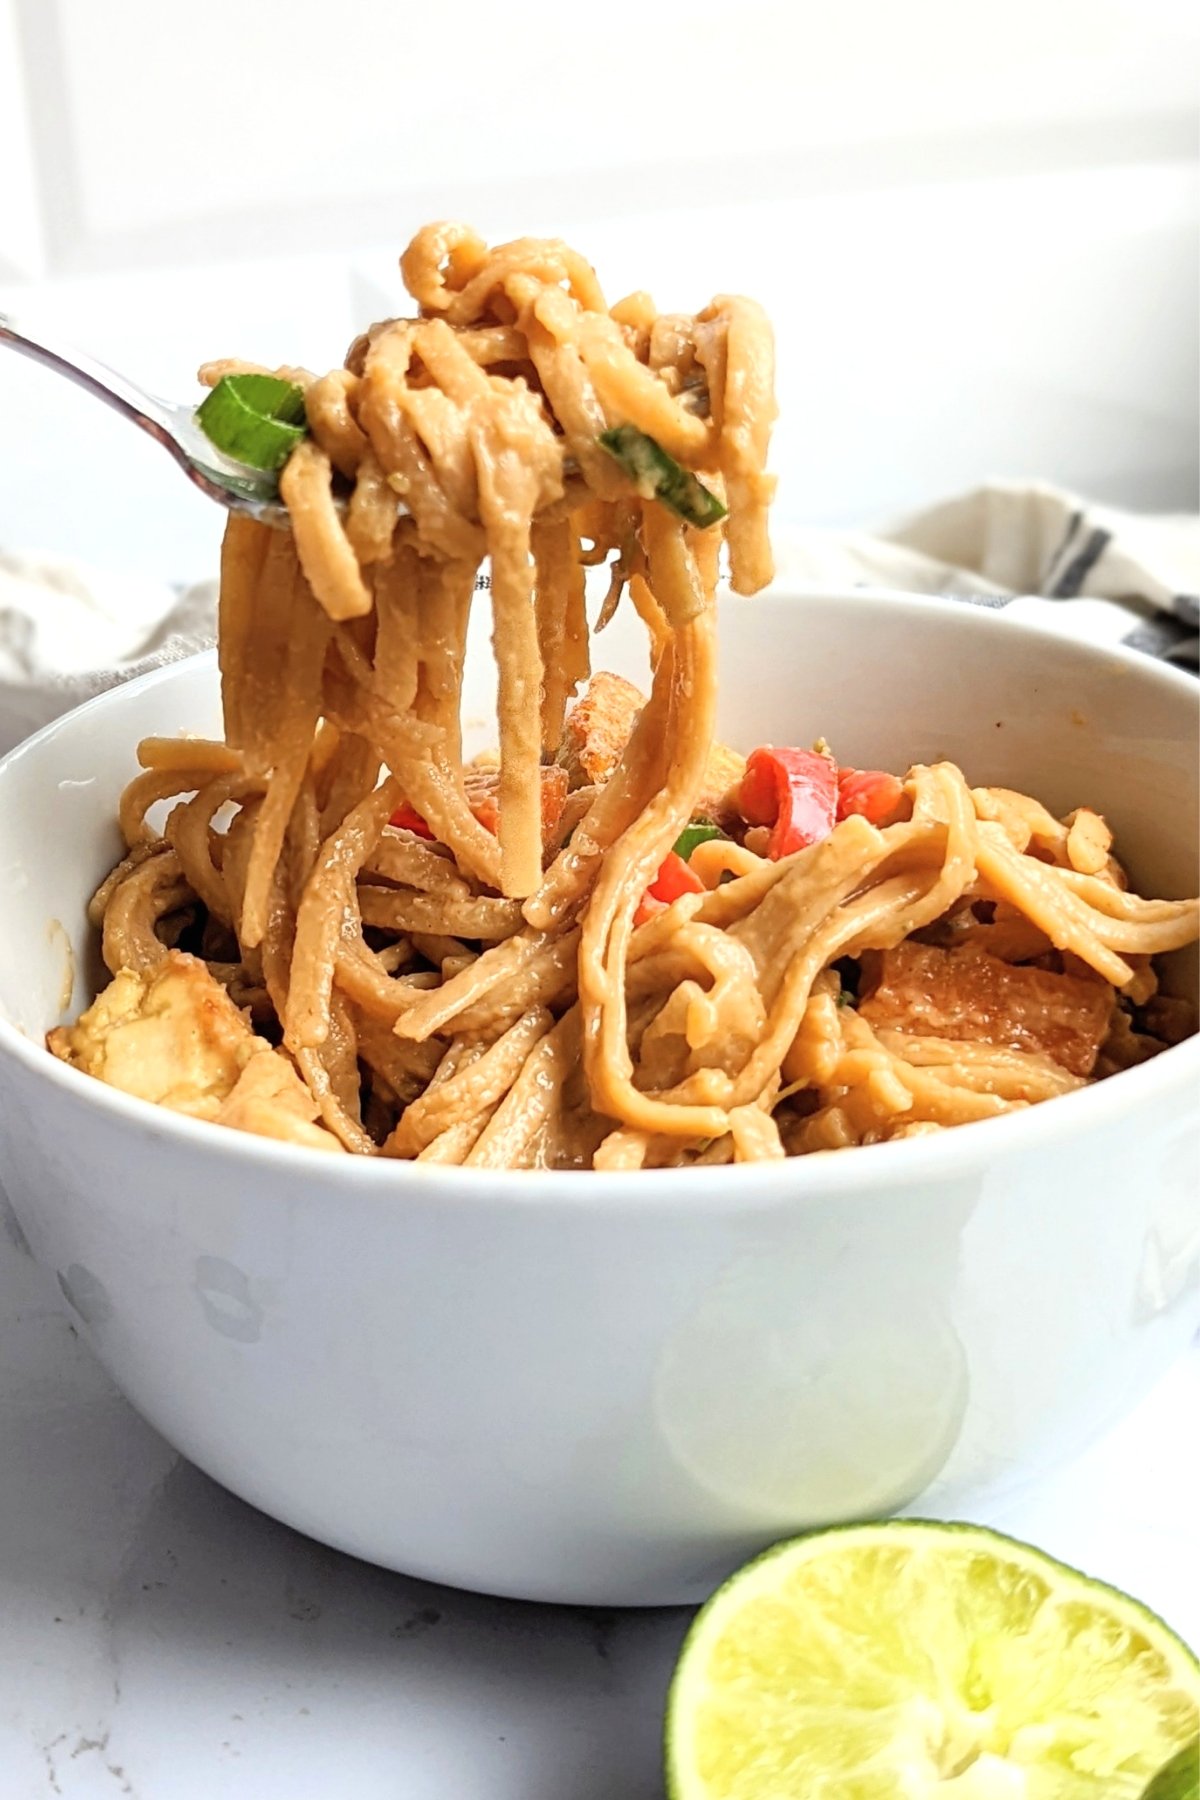 spicy instant pot noodles with satay peanut sauce recipe pressure cooker peanut noodles recipe vegan vegetarian dairy free noodles with peanut butter pasta